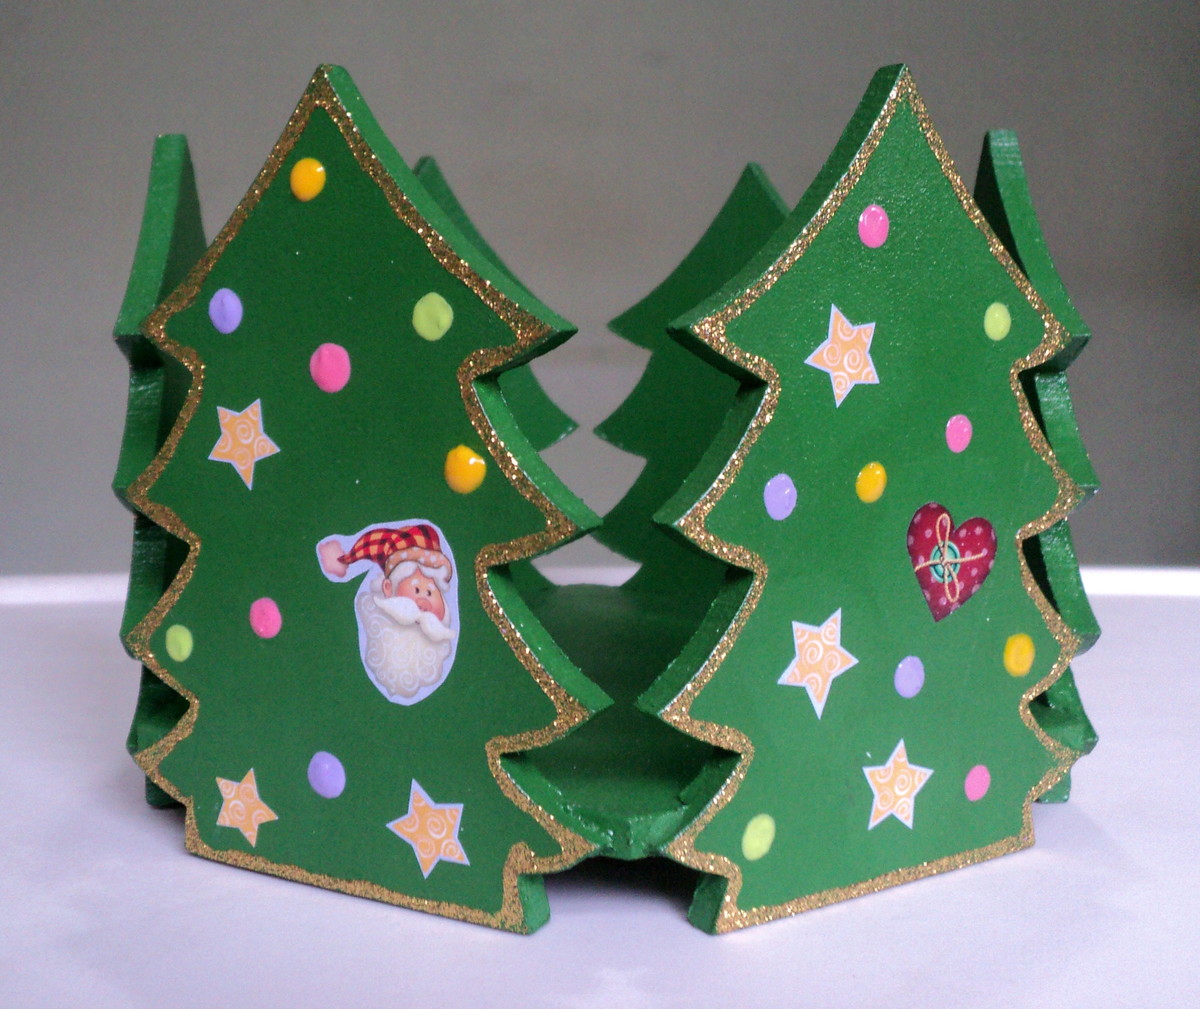 Crafts in mdf christmas trees